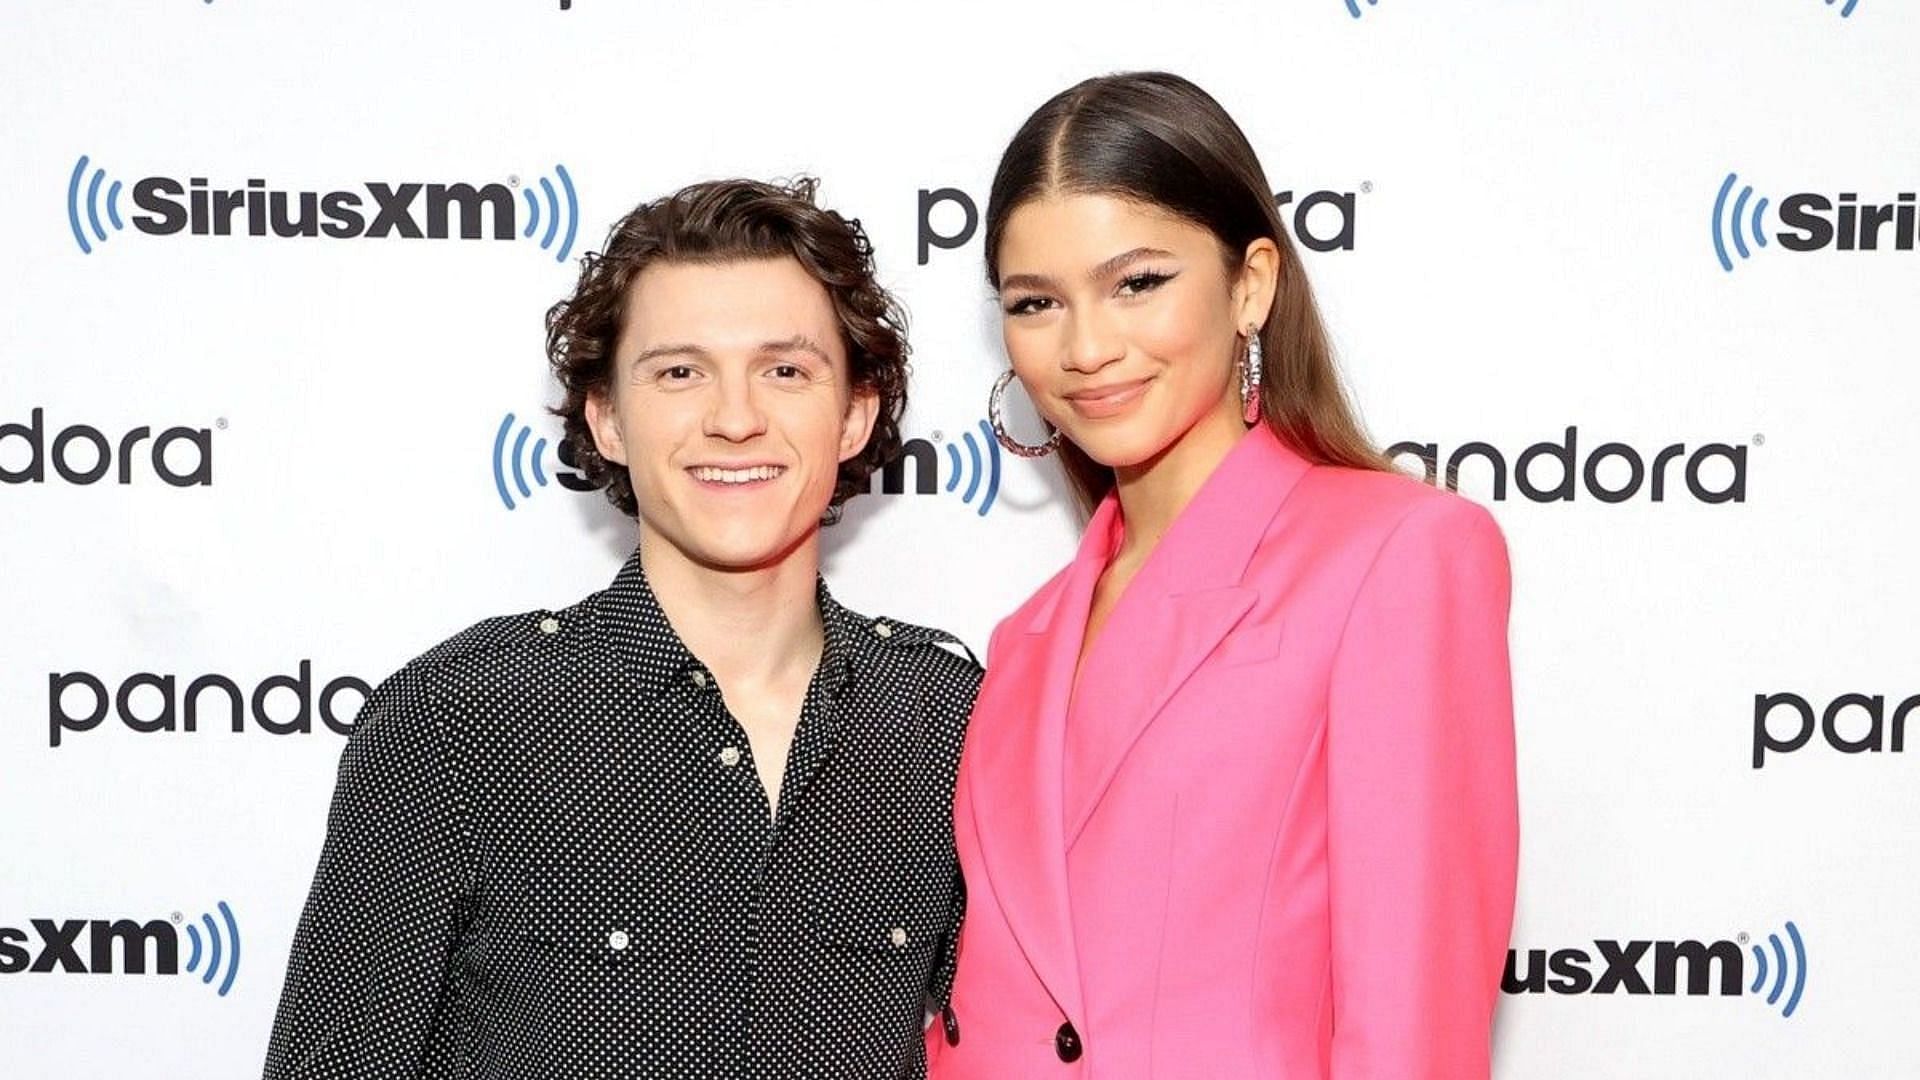 Tom Holland and Zendaya have been together for over a year (image via Getty Images)